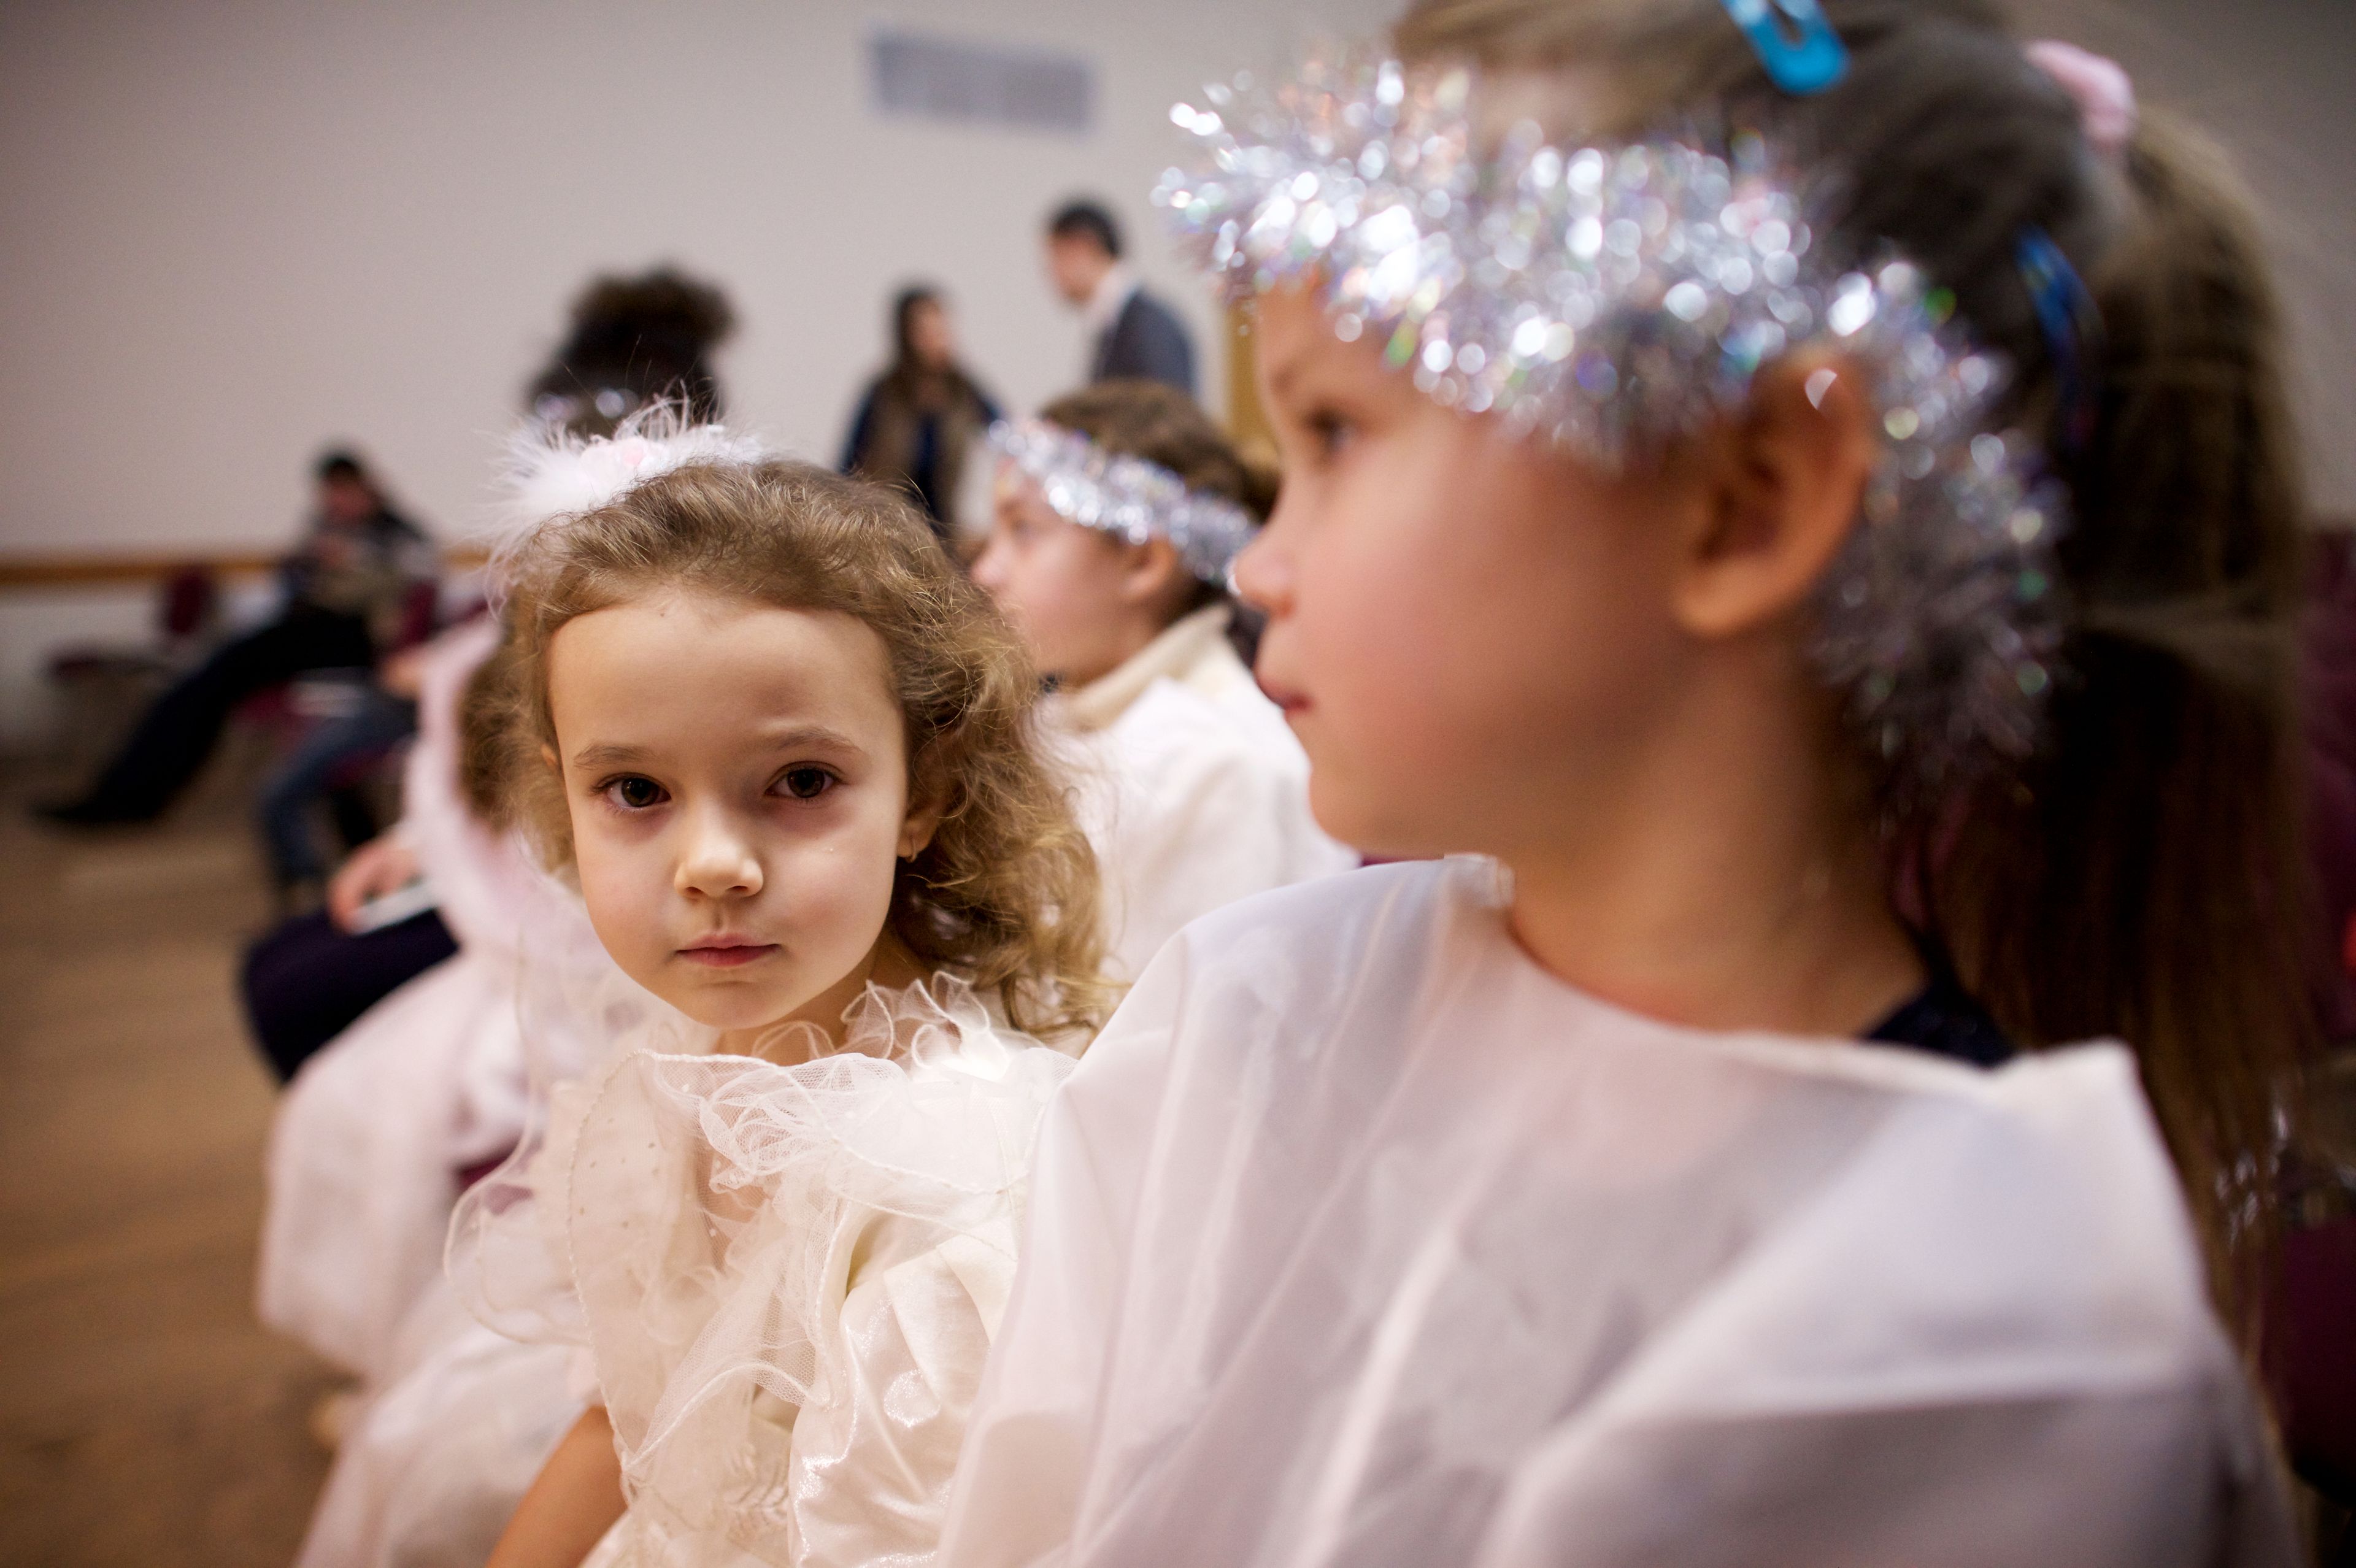 A number of images of children dressed up in costumes as they perform in a Christmas play at the Church Christmas Party.